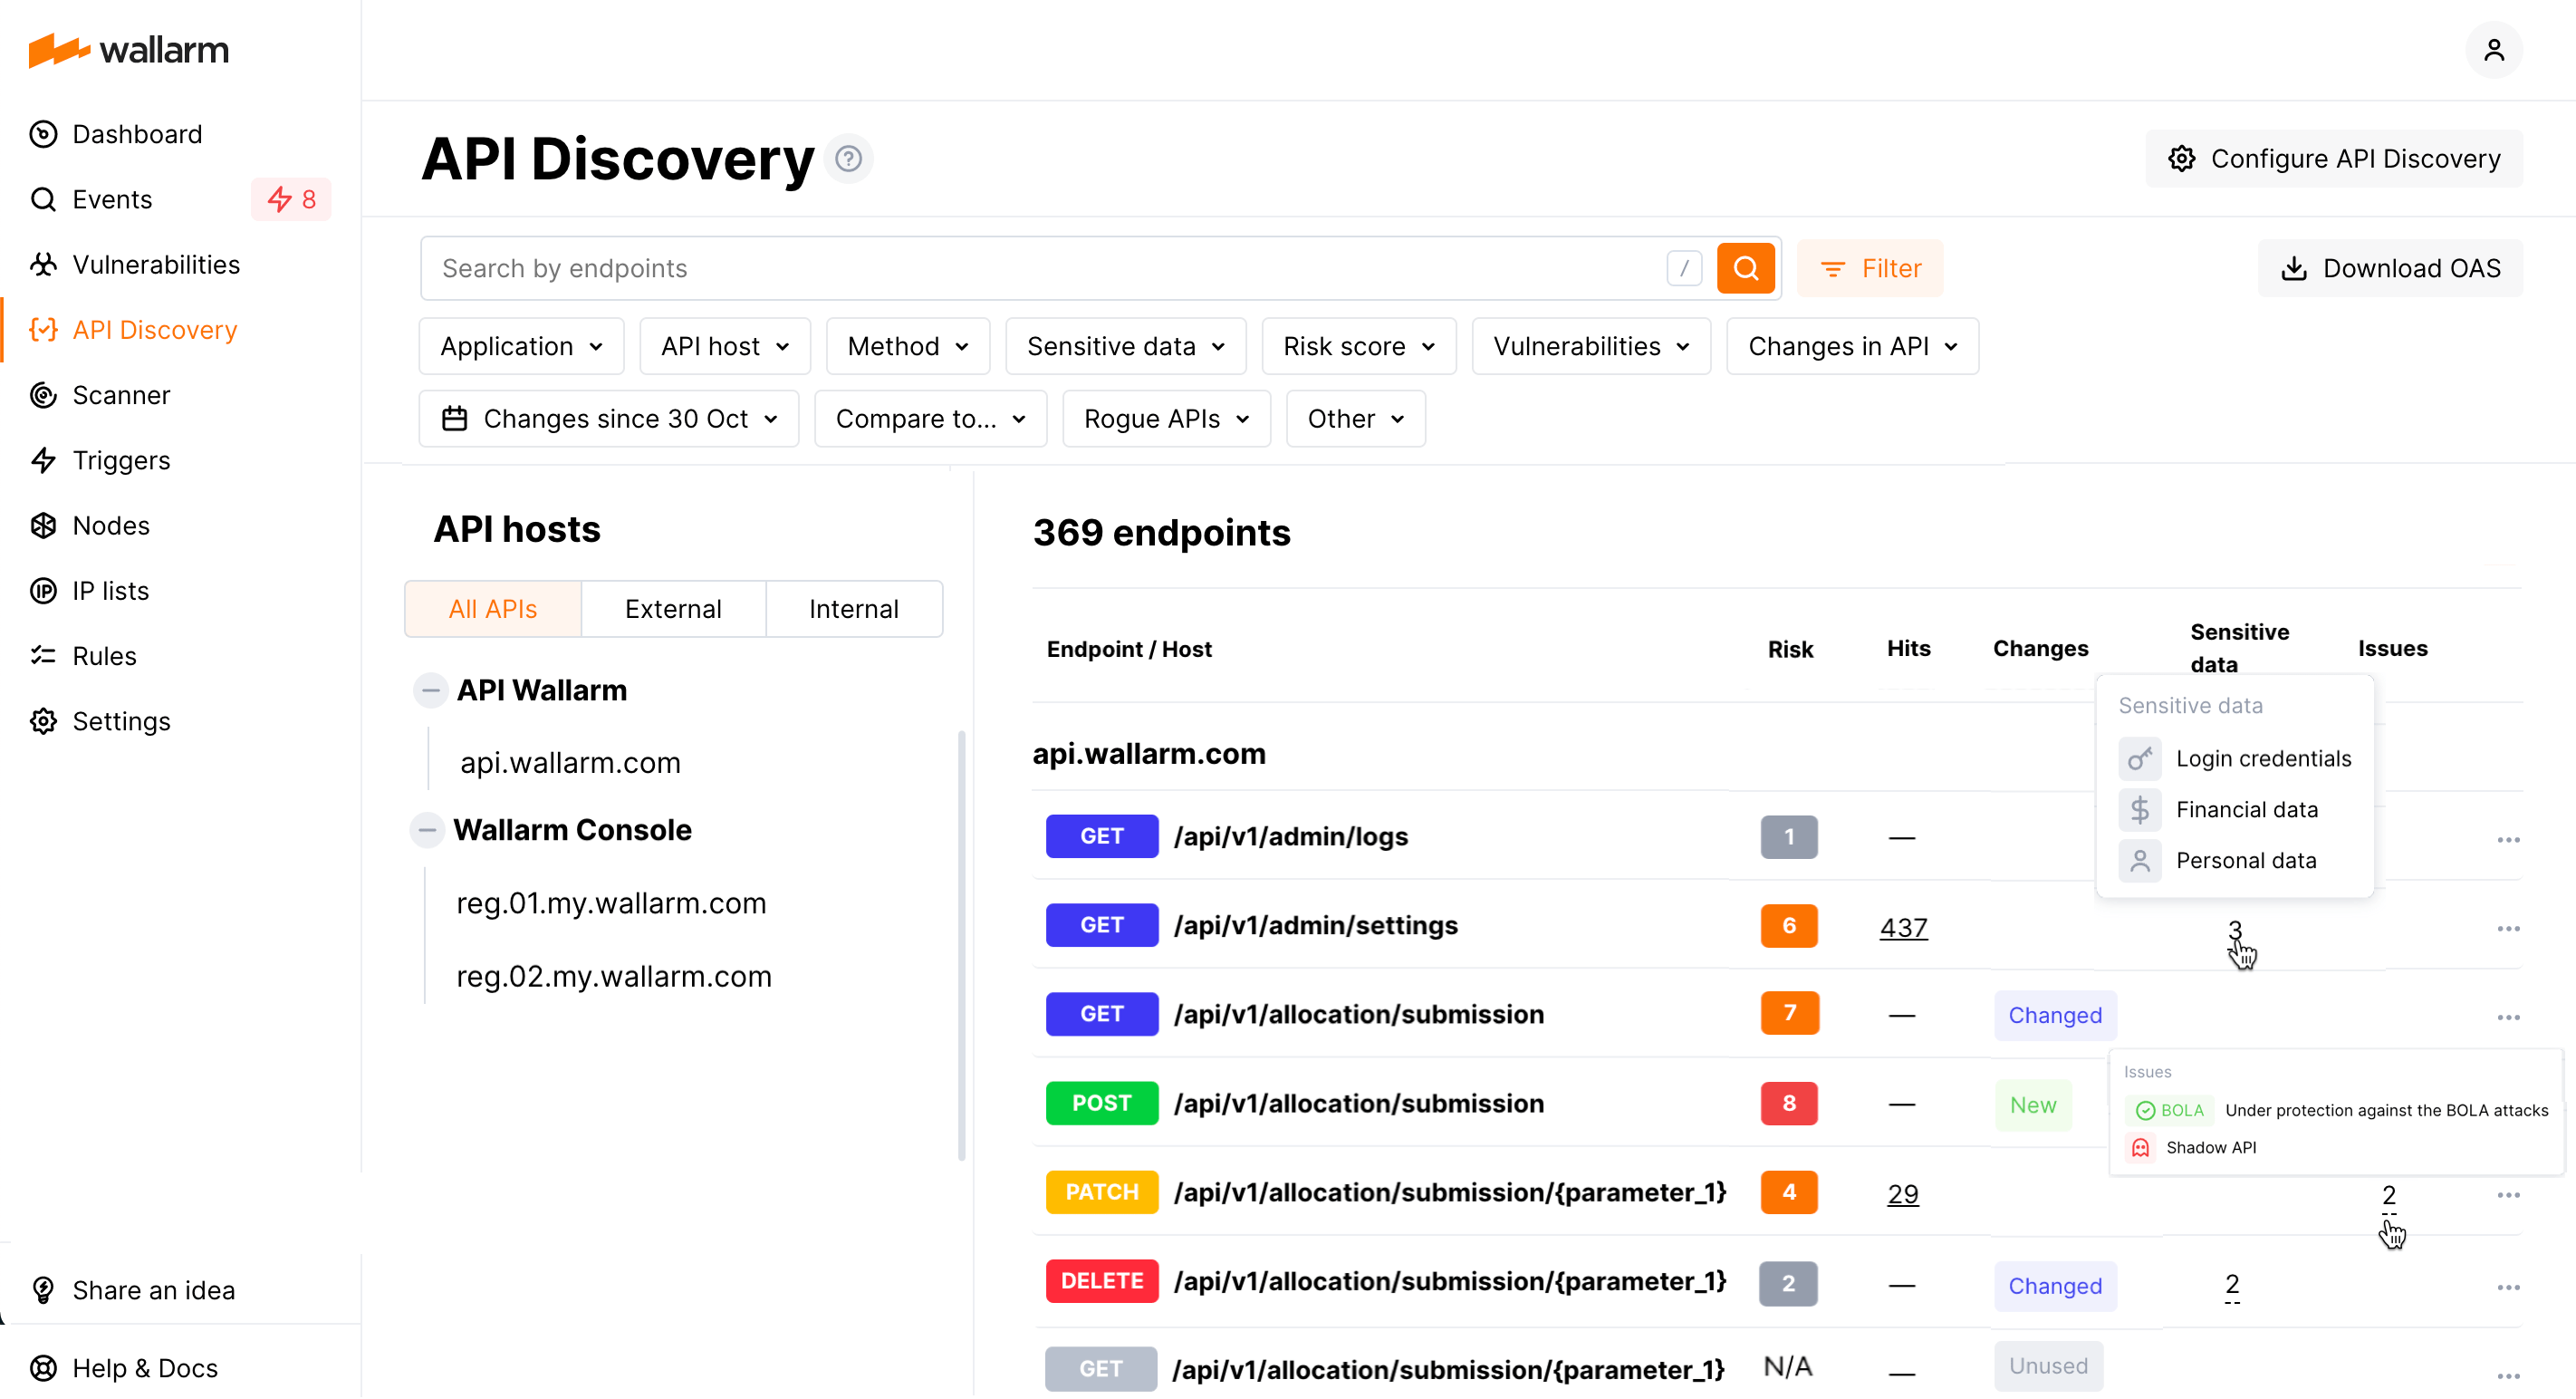 Endpoints discovered by API Discovery